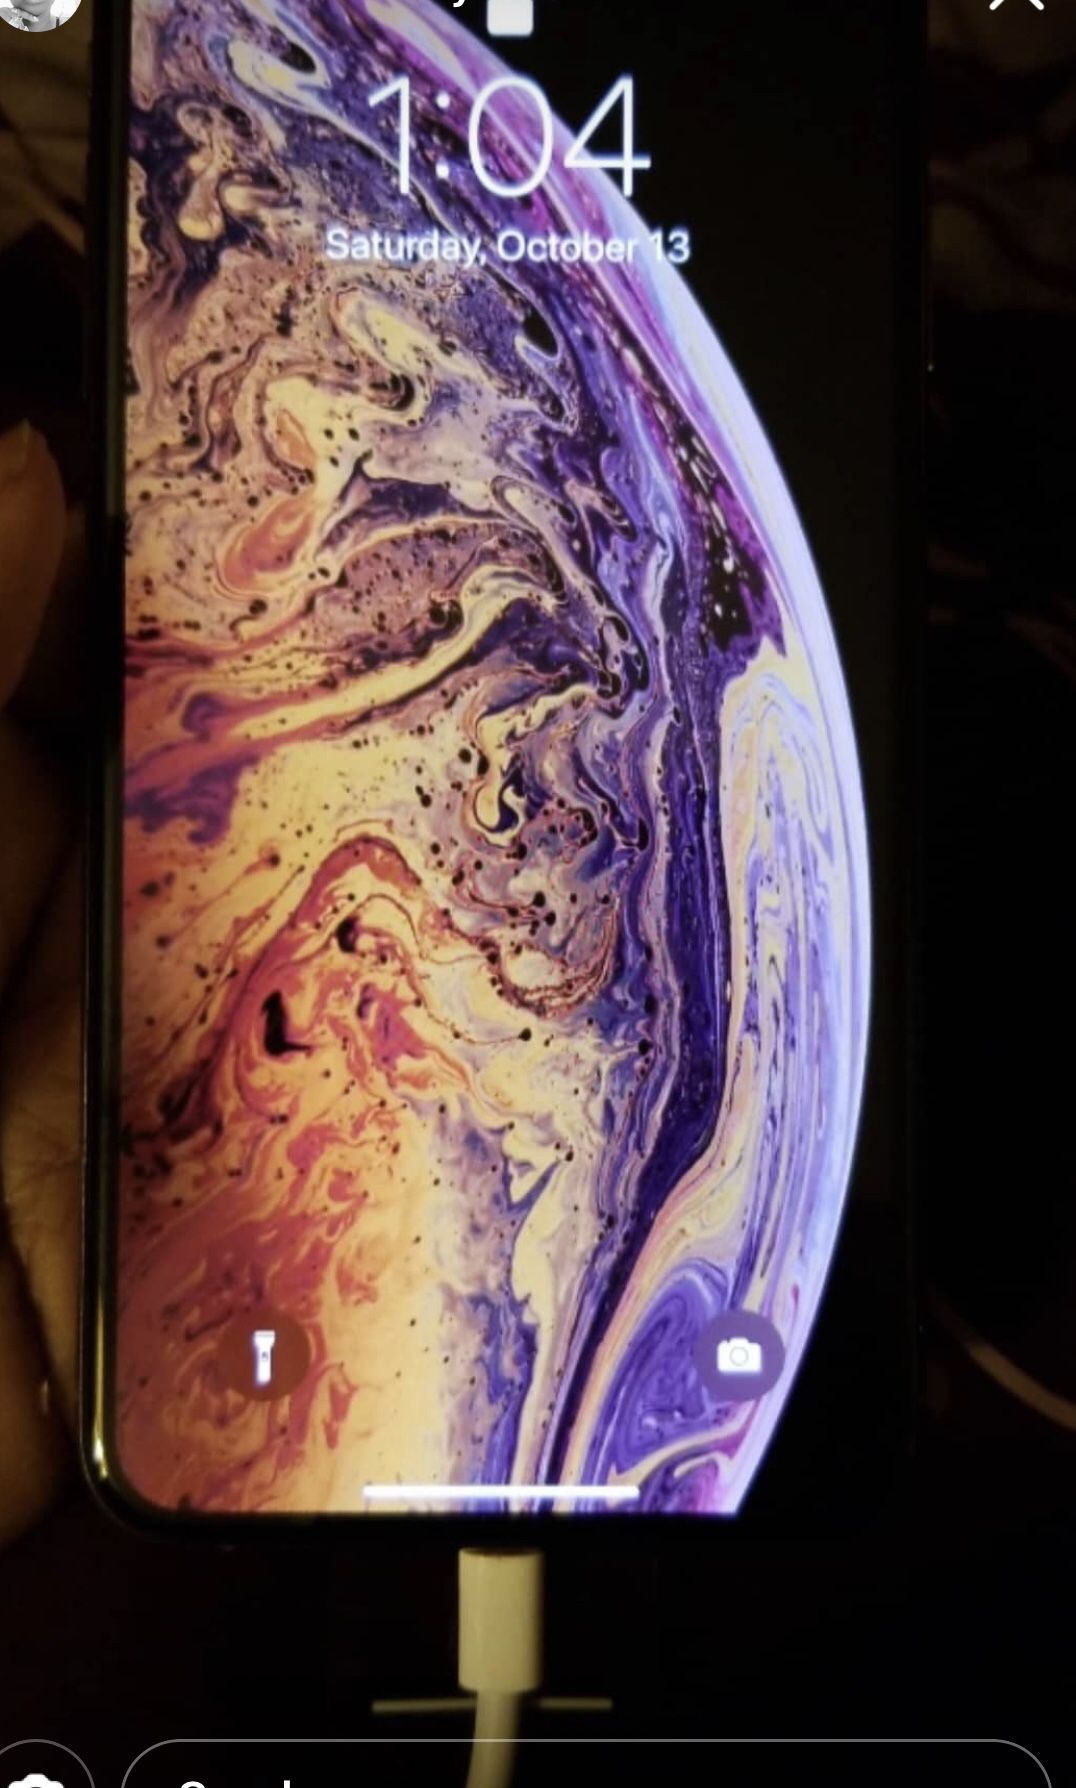 IPhone Xs Max comes with everything it’s brand new